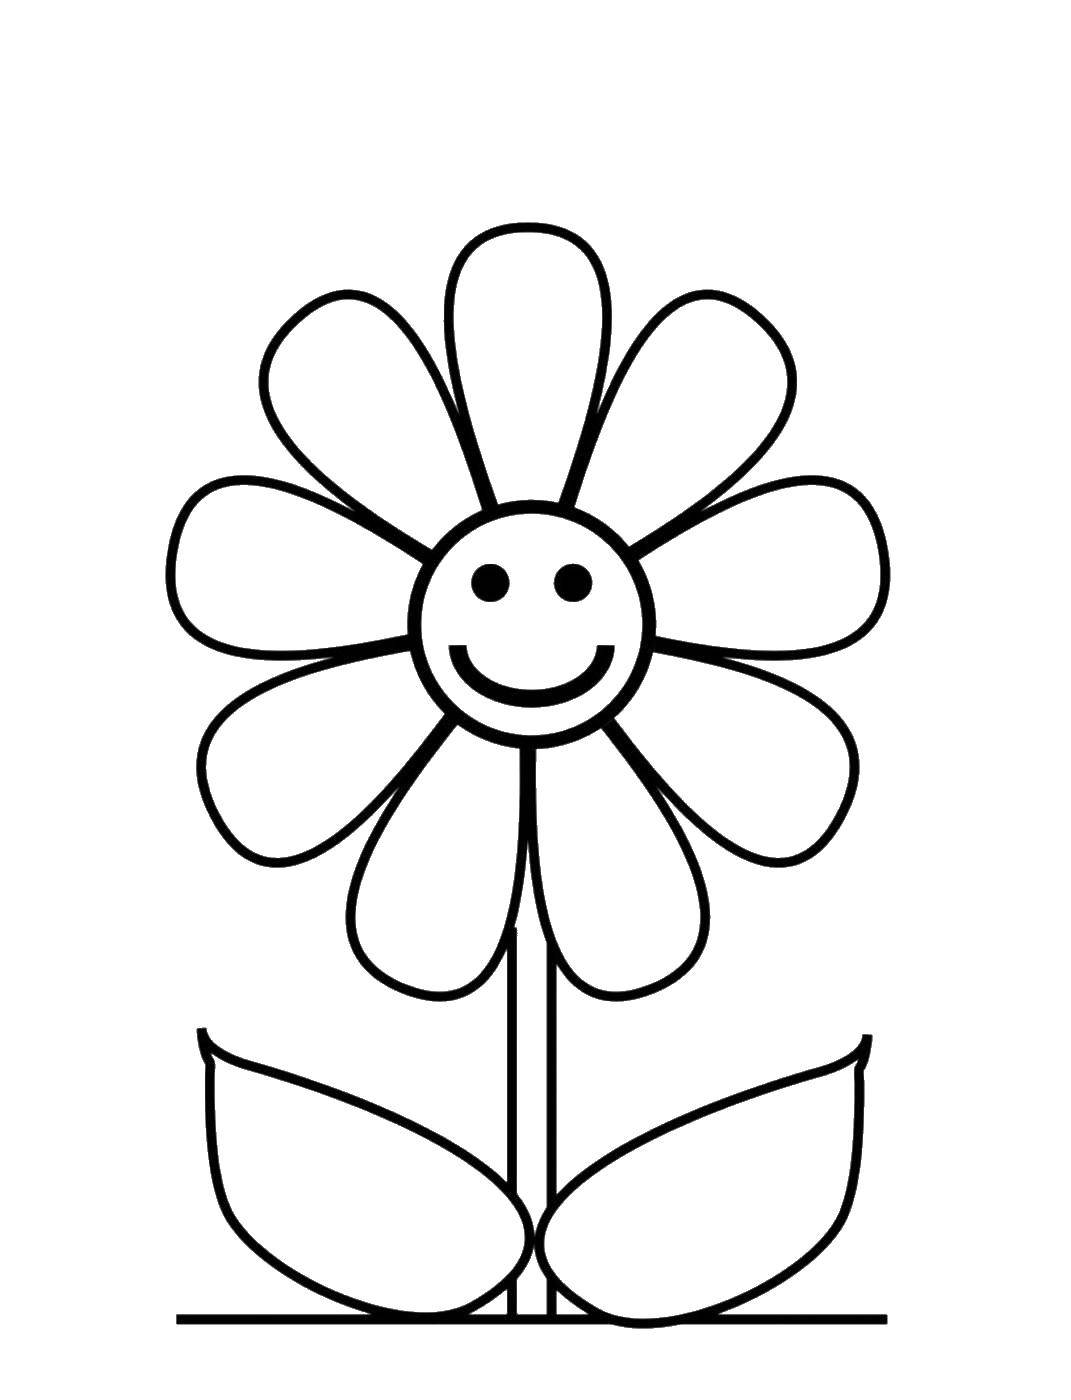 Coloring Flower loves to smile. Category Flowers. Tags:  Flowers.